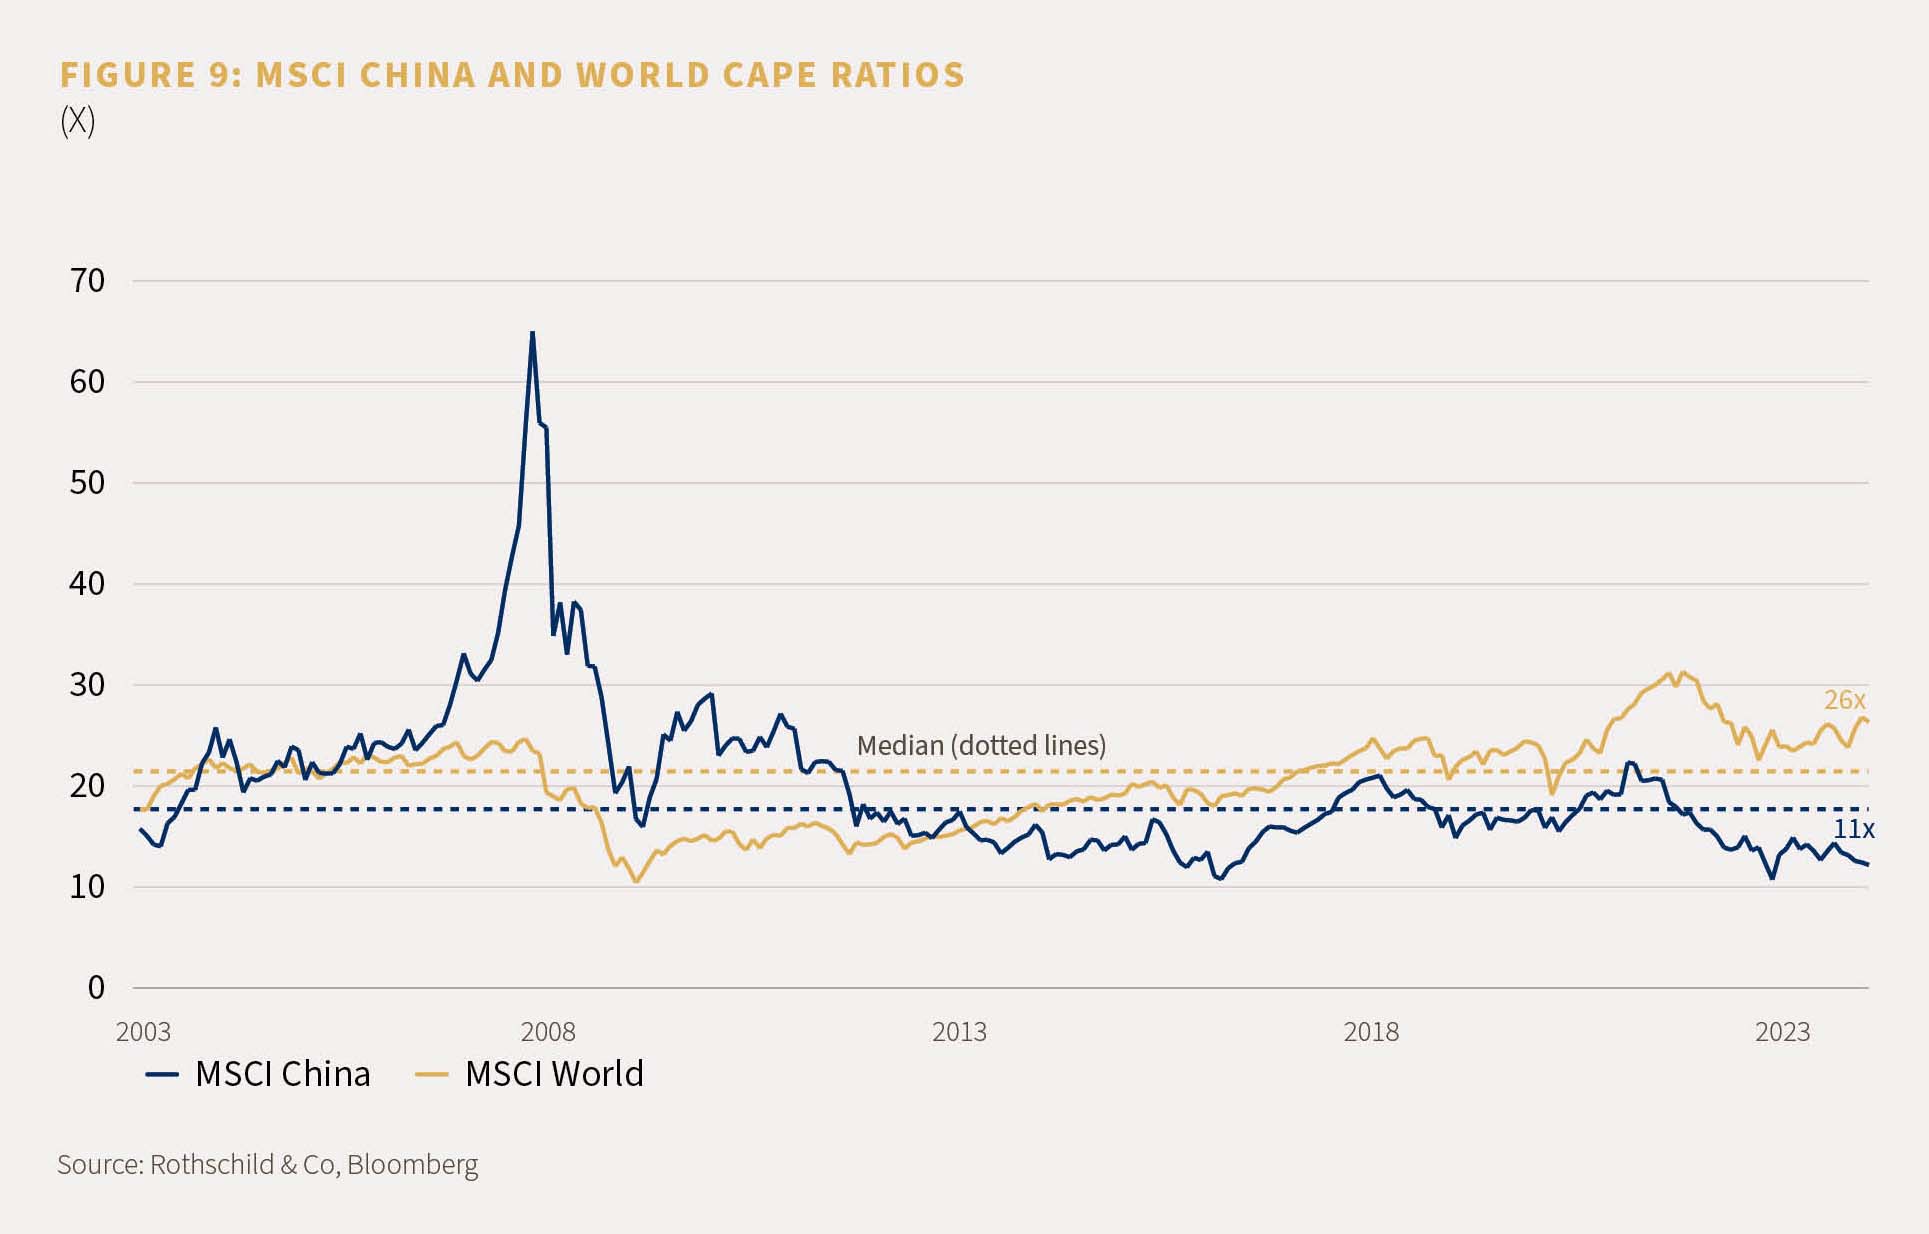 MSCI China and MSCI World cape ratios. MSCI World is at 26x whilst MSCI China is at 11x